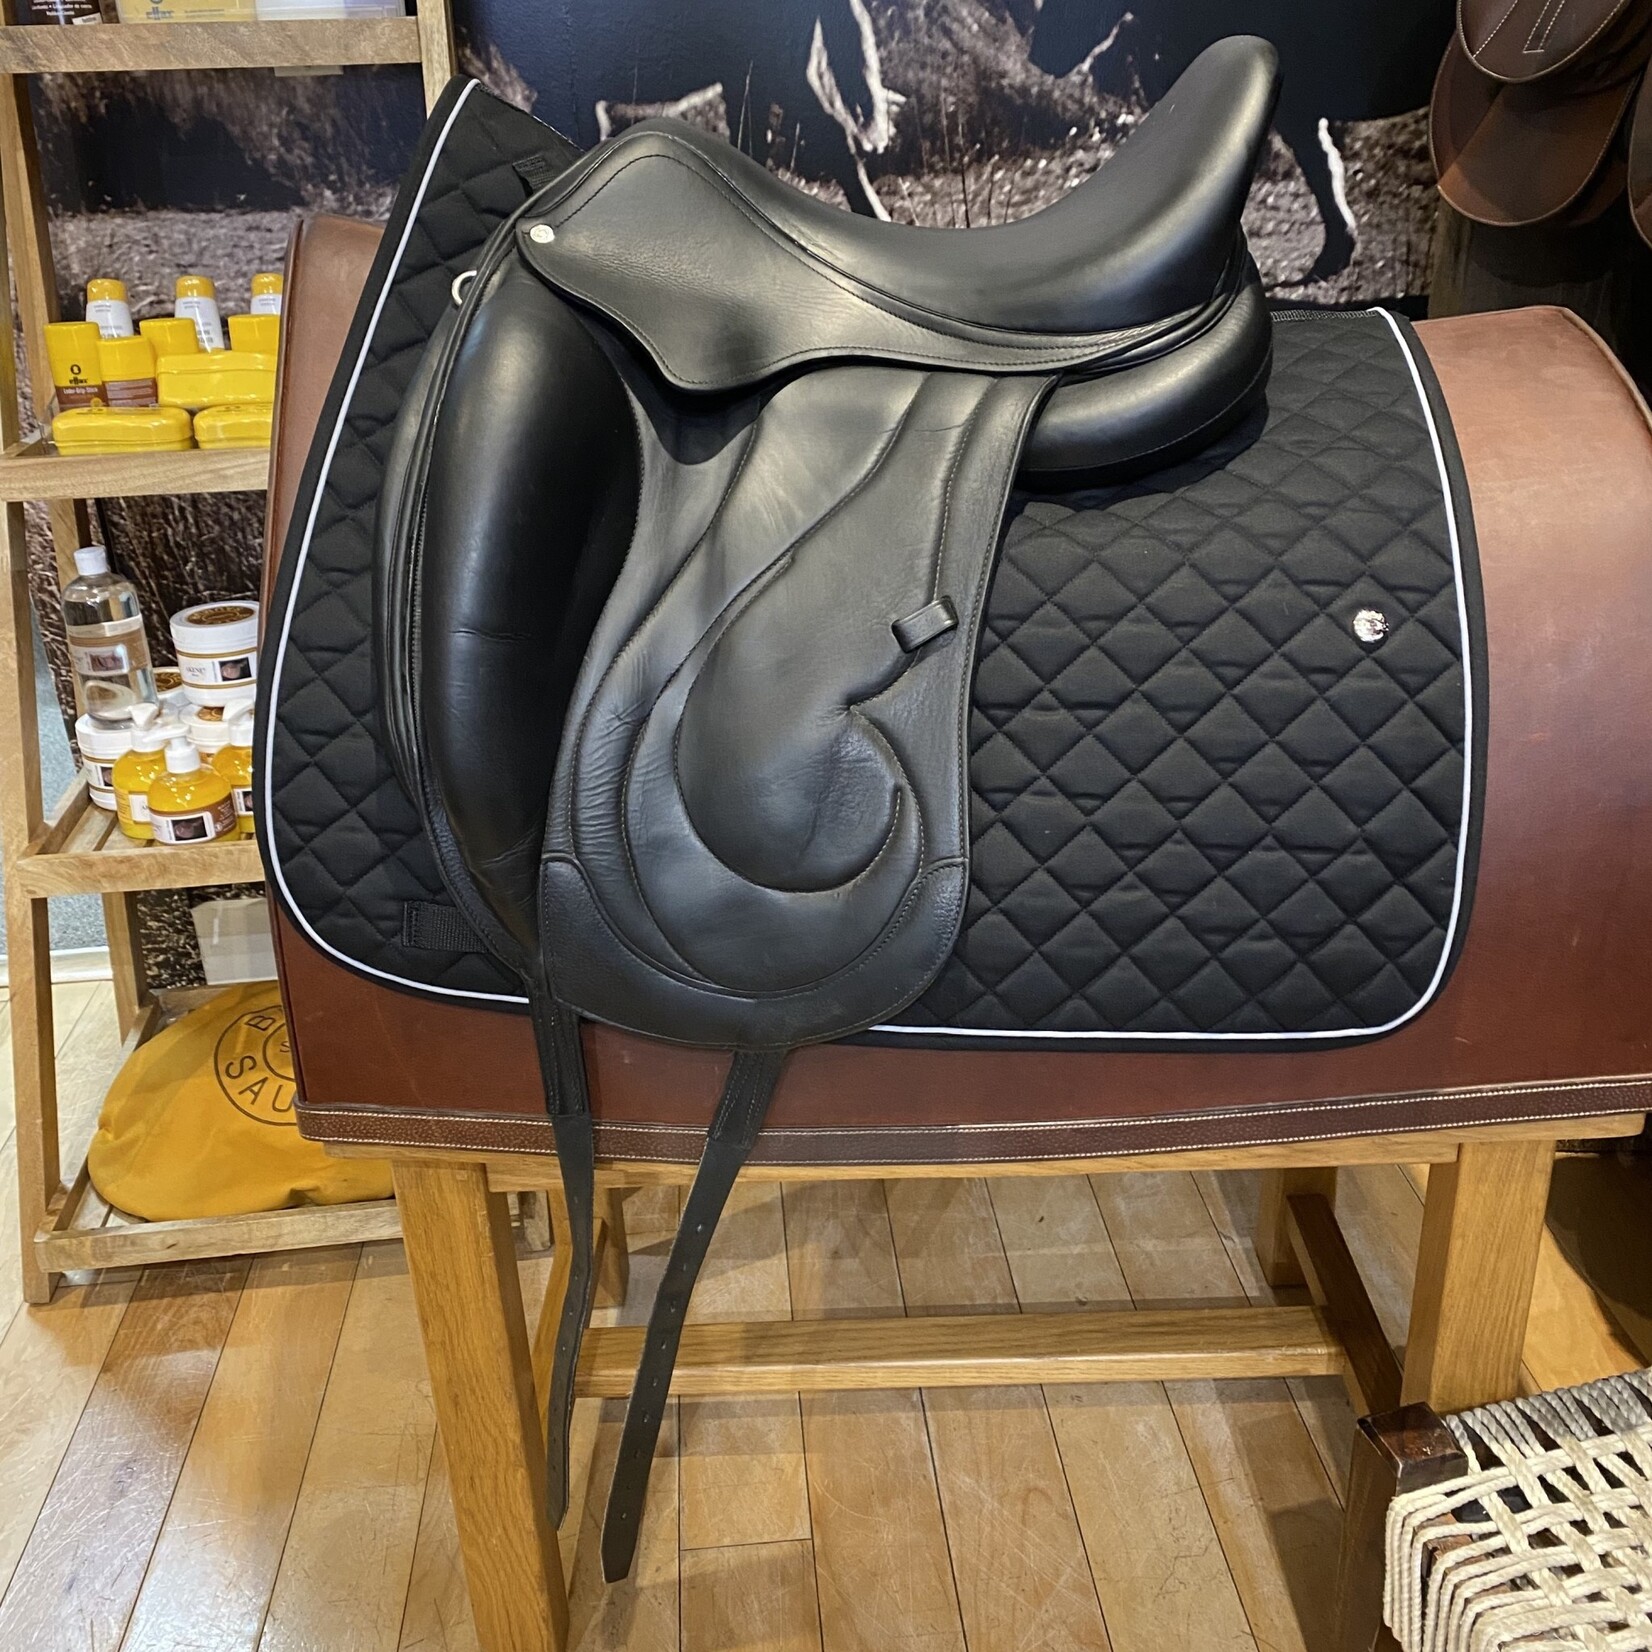 #18 3165 Antares Cadence, 17L seat, Monoflap Dressage, 3R Flap, measures 5.5" dot to dot, w/ Cover